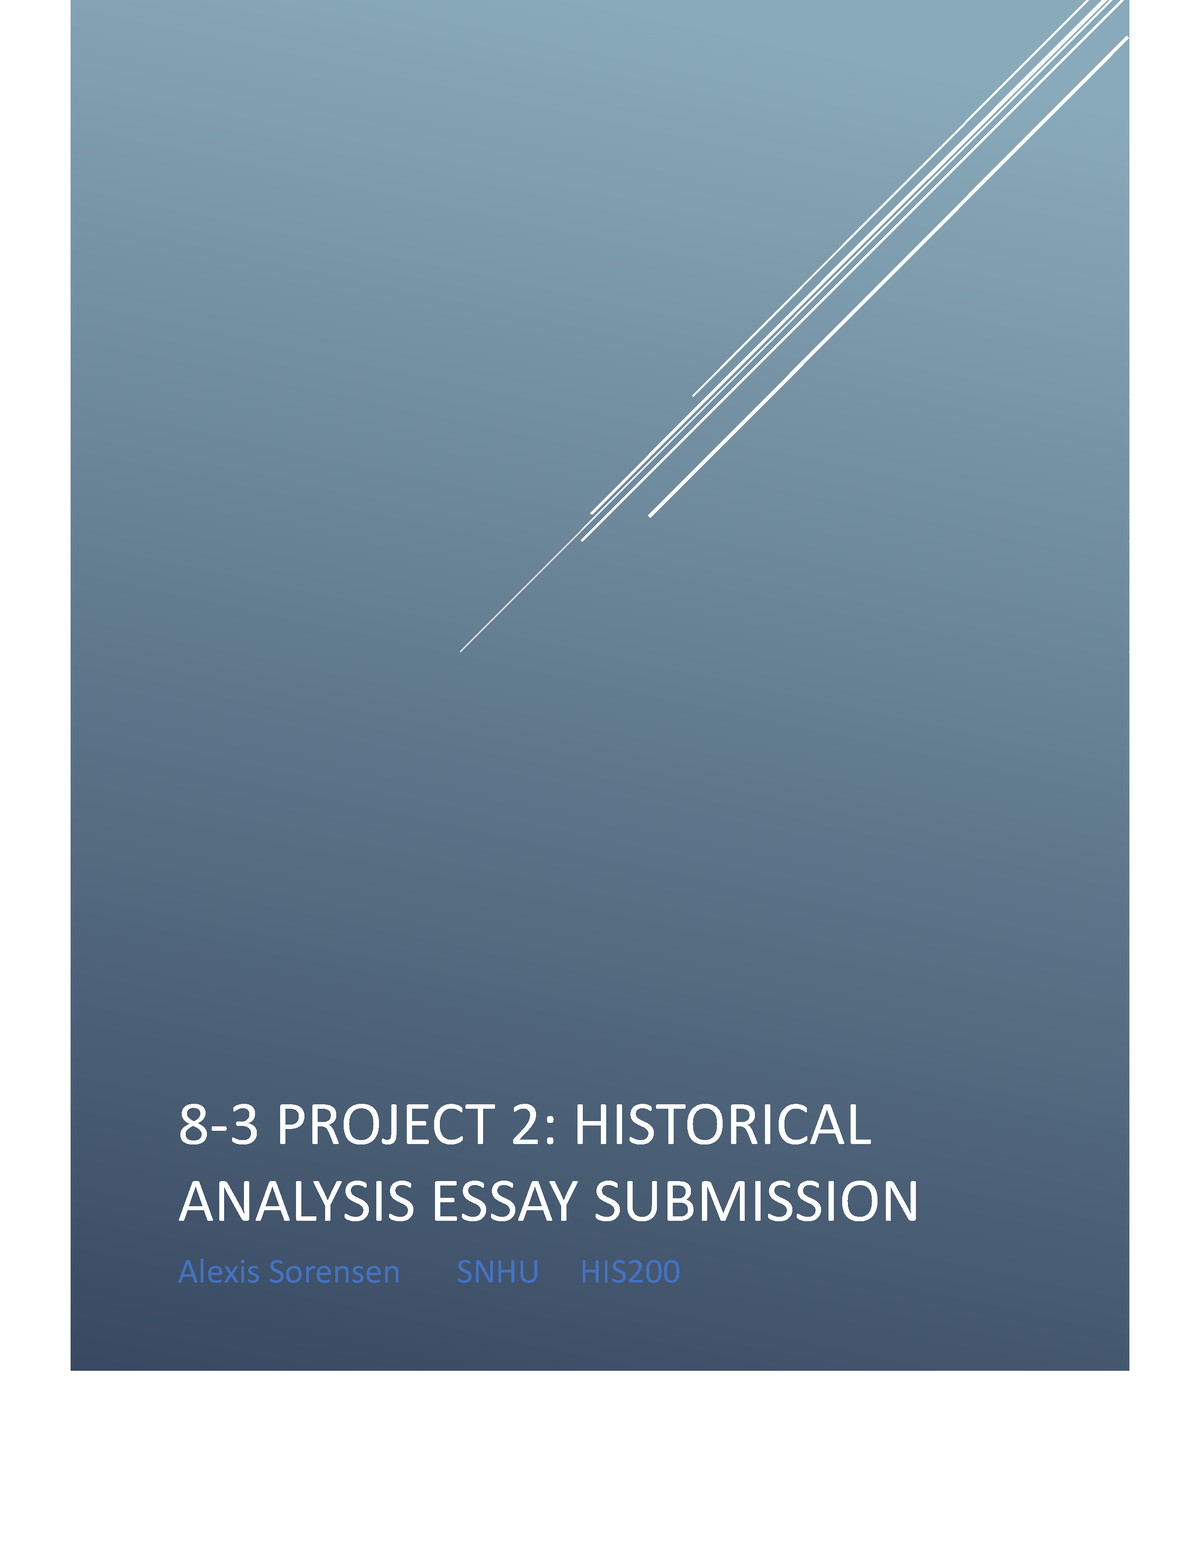 importance of historical analysis essay